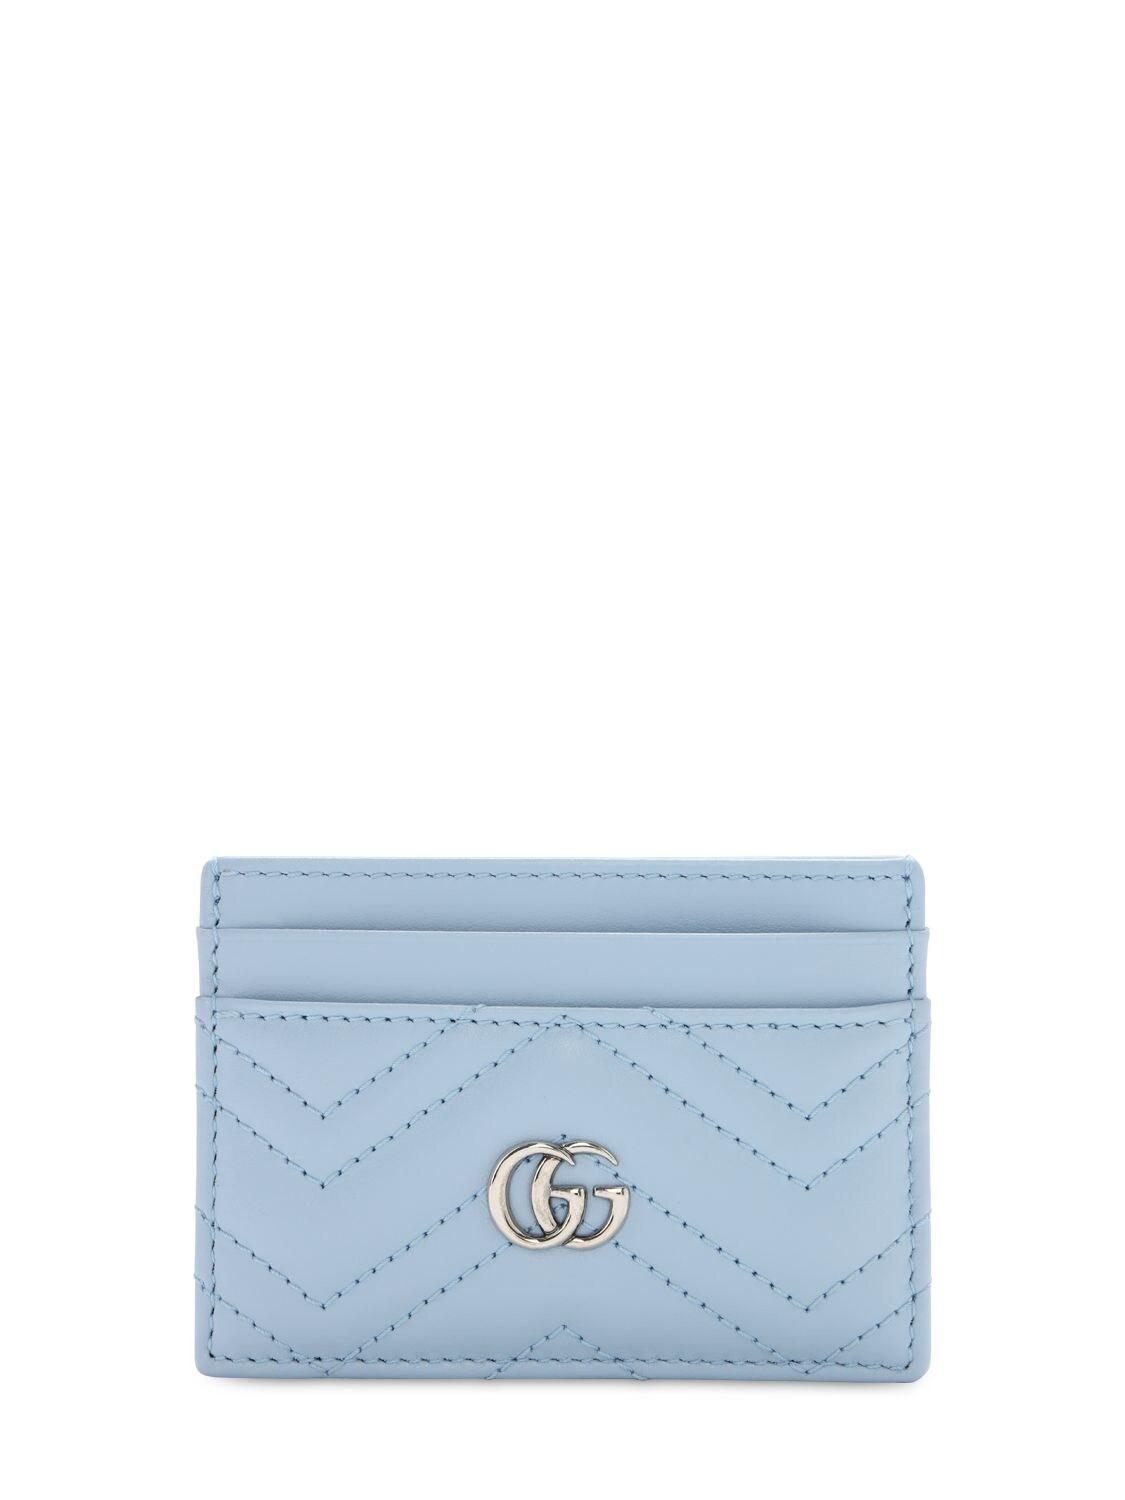 Gucci Marmont Card Case in | Lyst